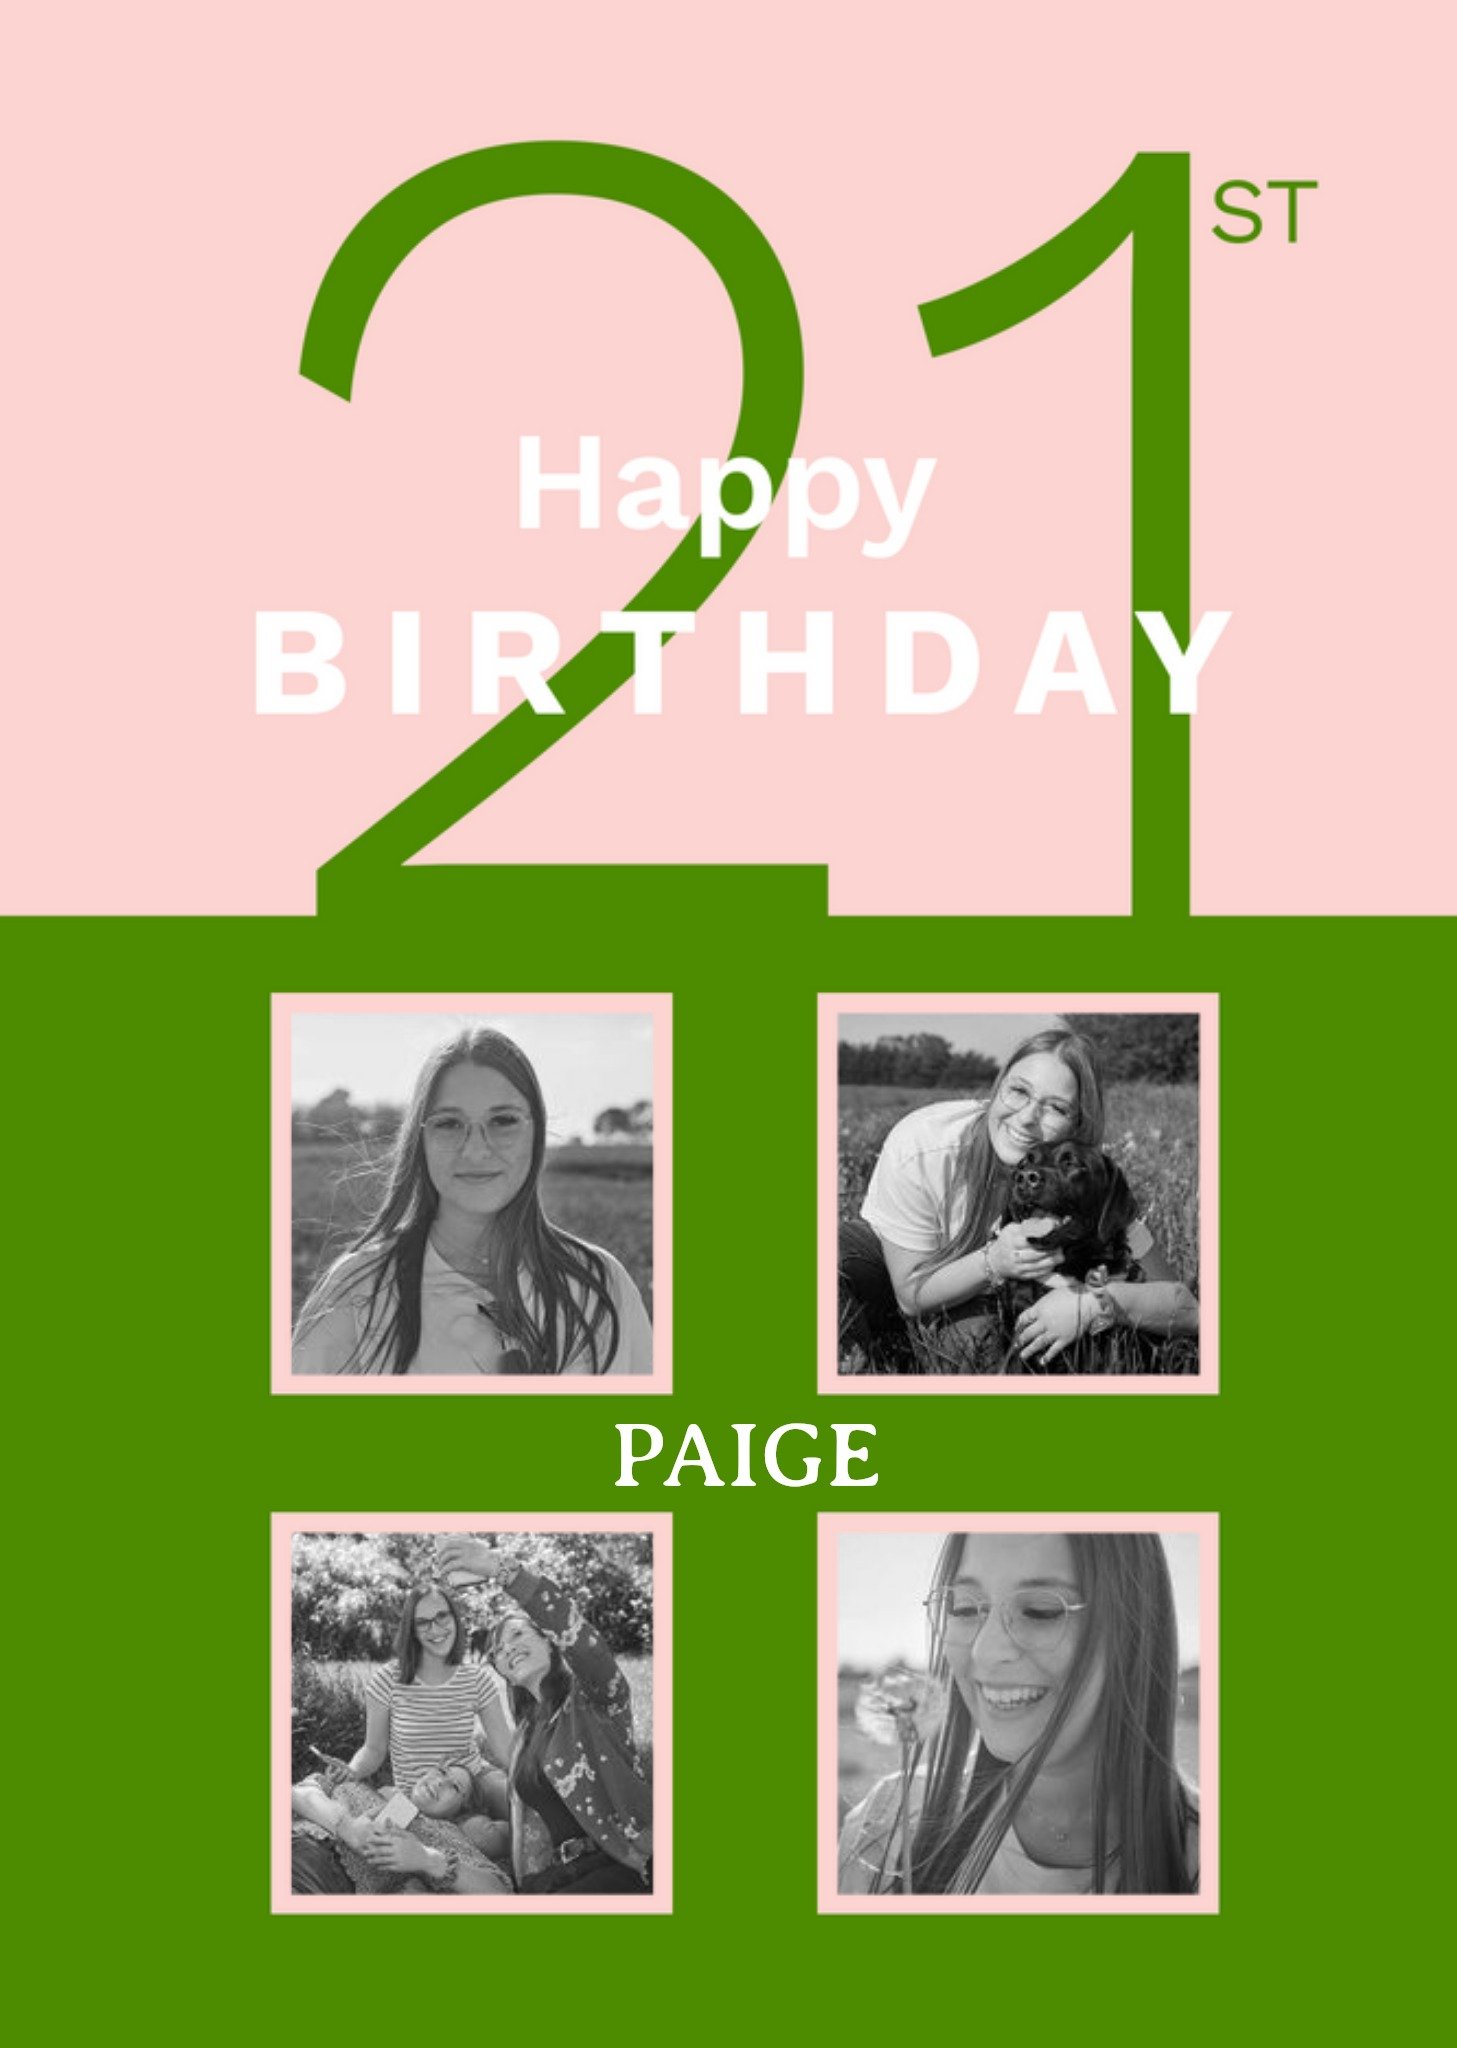 Moonpig Featuring A Two Tone Design With Four Photo Frames 21st Birthday Photo Upload Card Ecard